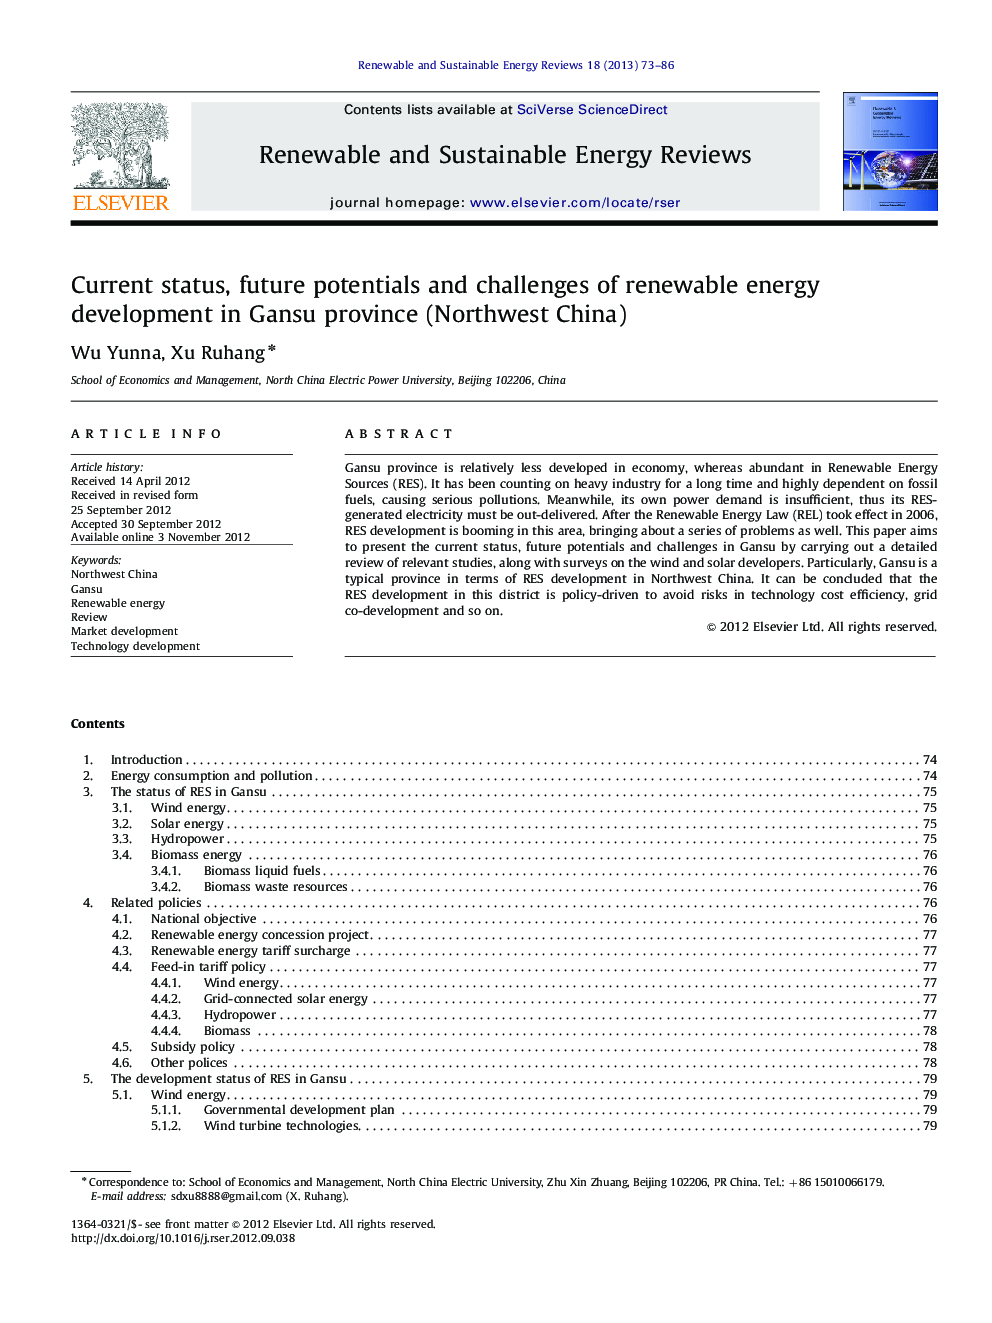 Current status, future potentials and challenges of renewable energy development in Gansu province (Northwest China)